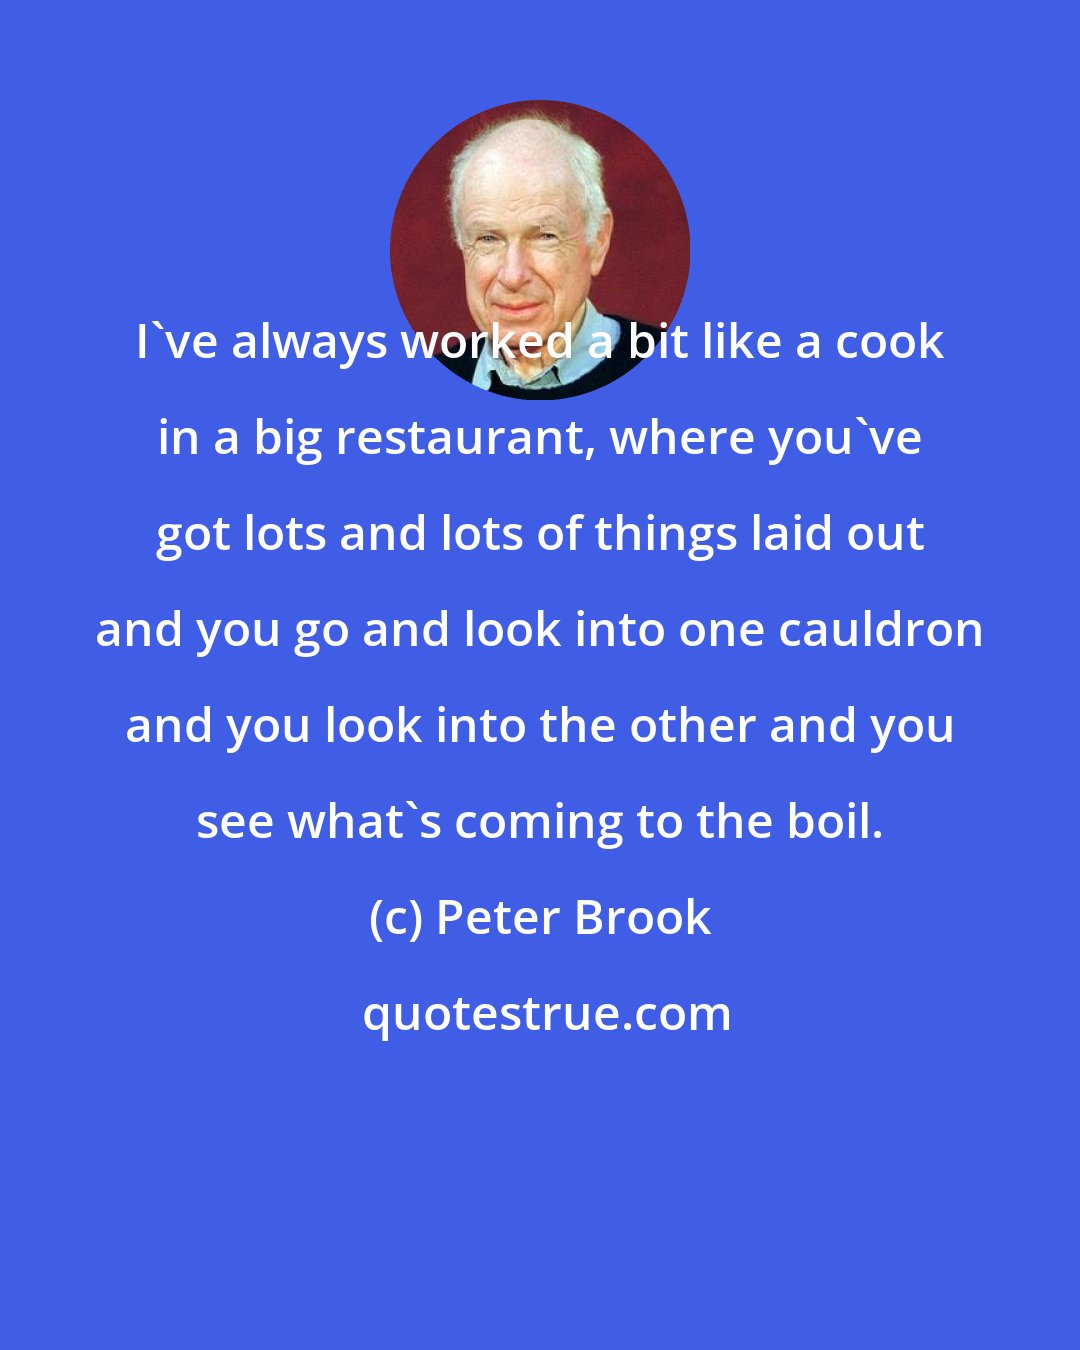 Peter Brook: I've always worked a bit like a cook in a big restaurant, where you've got lots and lots of things laid out and you go and look into one cauldron and you look into the other and you see what's coming to the boil.